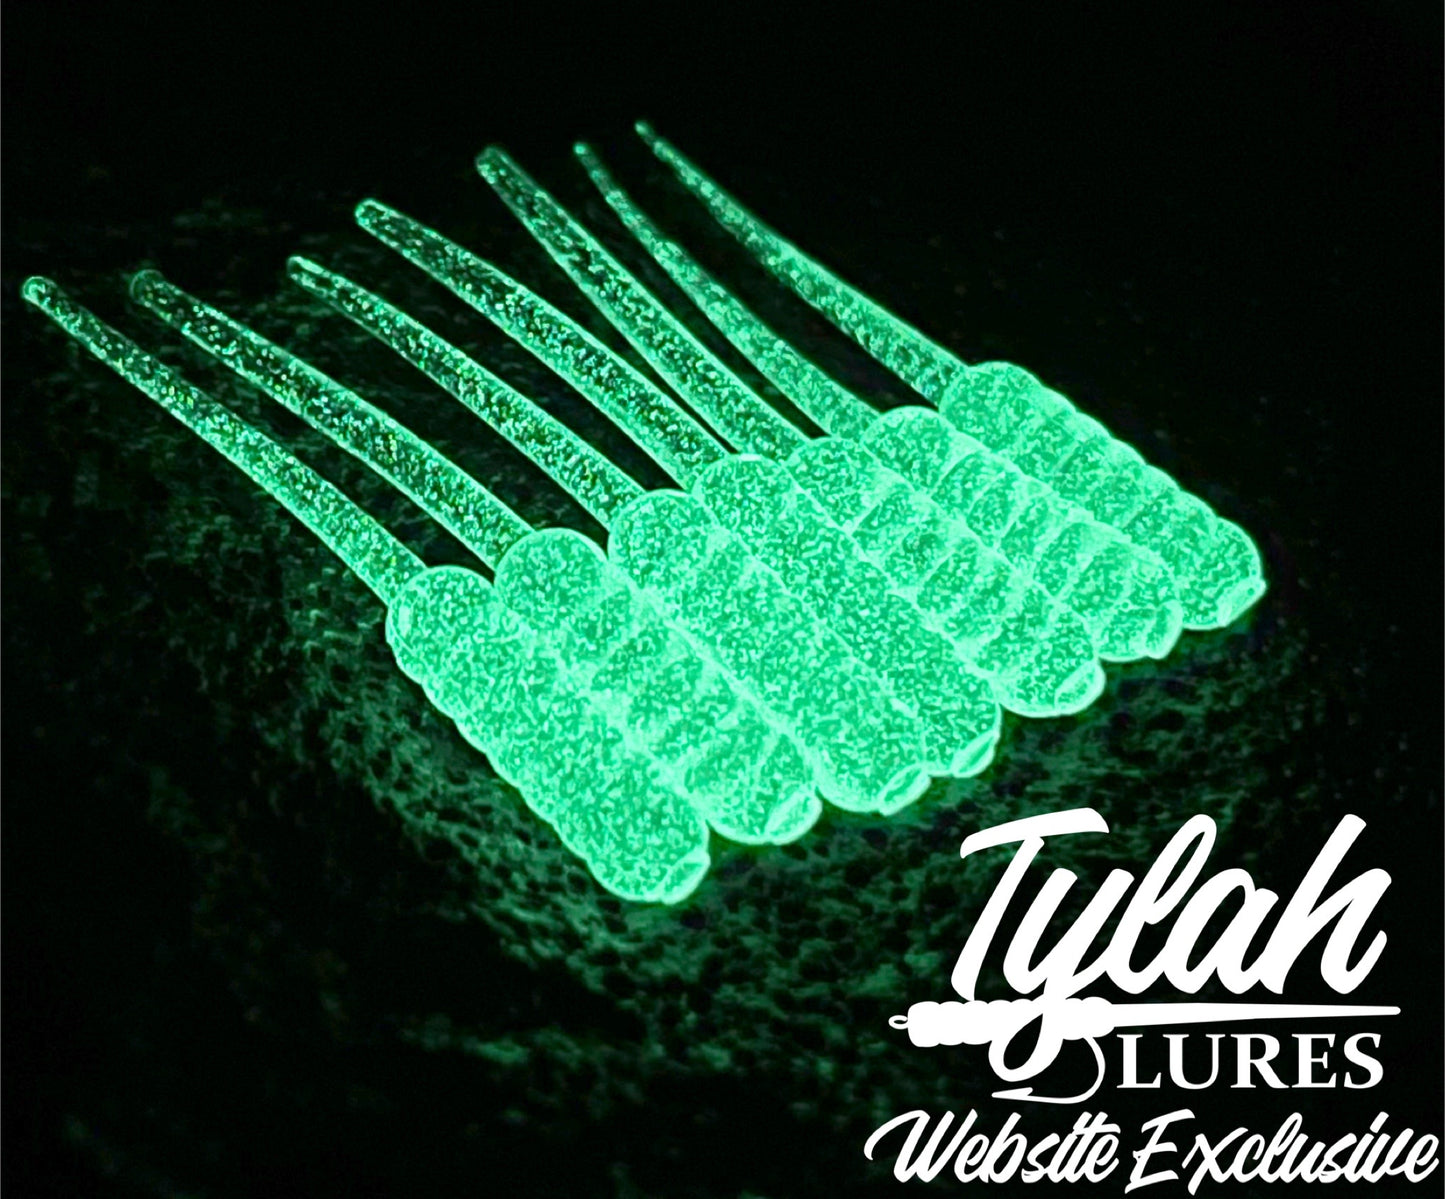 TylahLures Website Exclusive Clear Glow 1.5in.